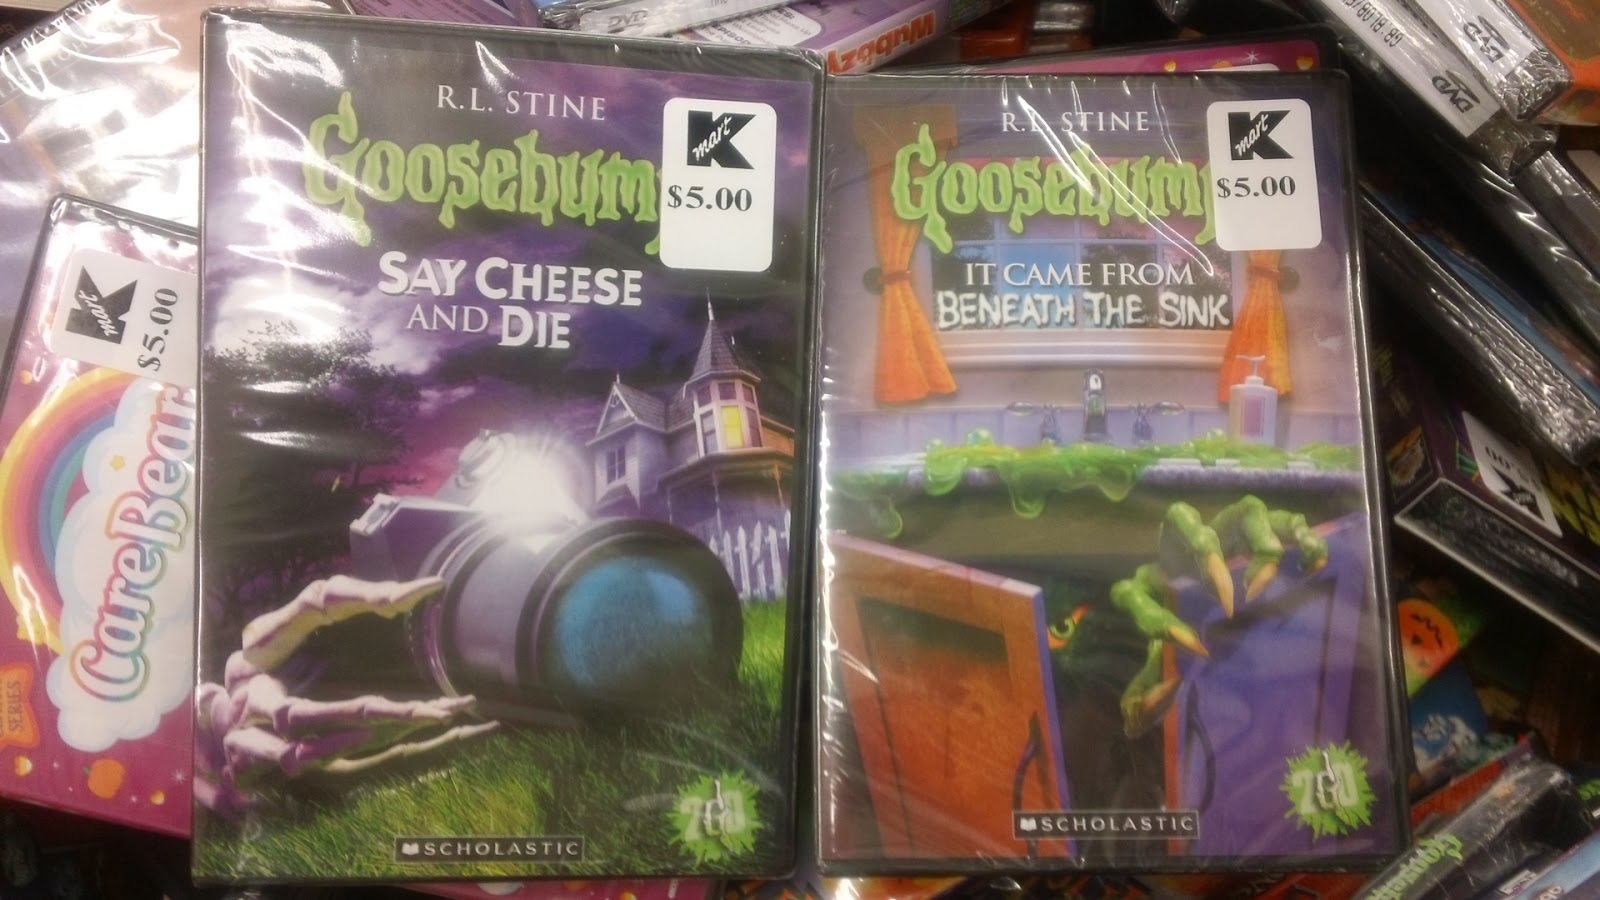 Extreme Couponing Mommy: $3.00 Goosebumps DVDs at KMart